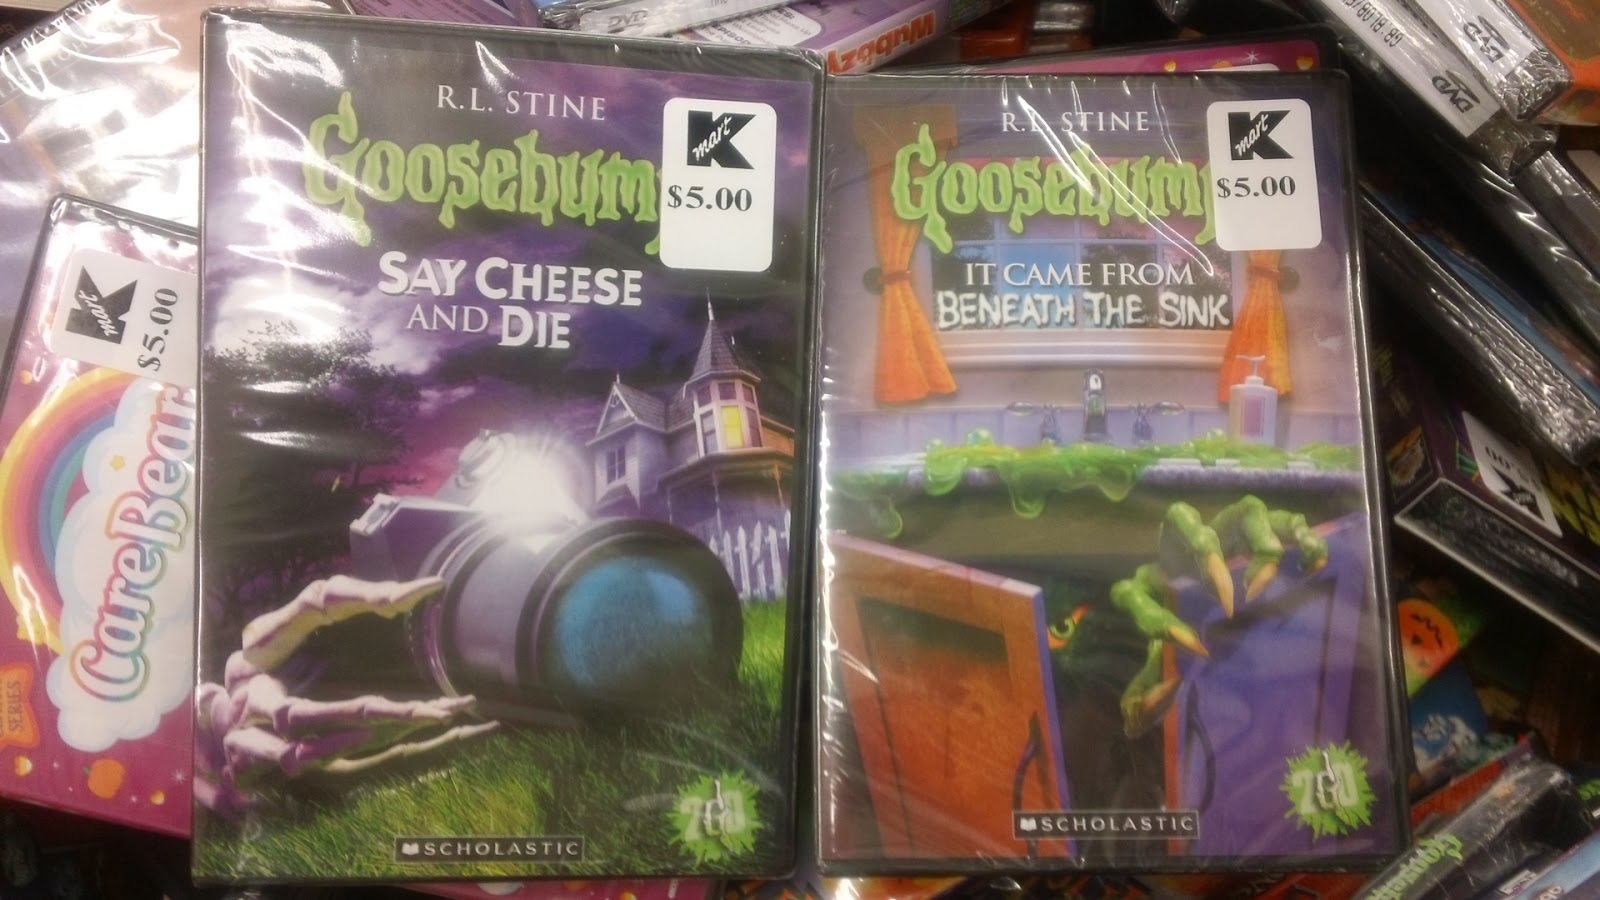 Extreme Couponing Mommy: $3.00 Goosebumps DVDs at KMart